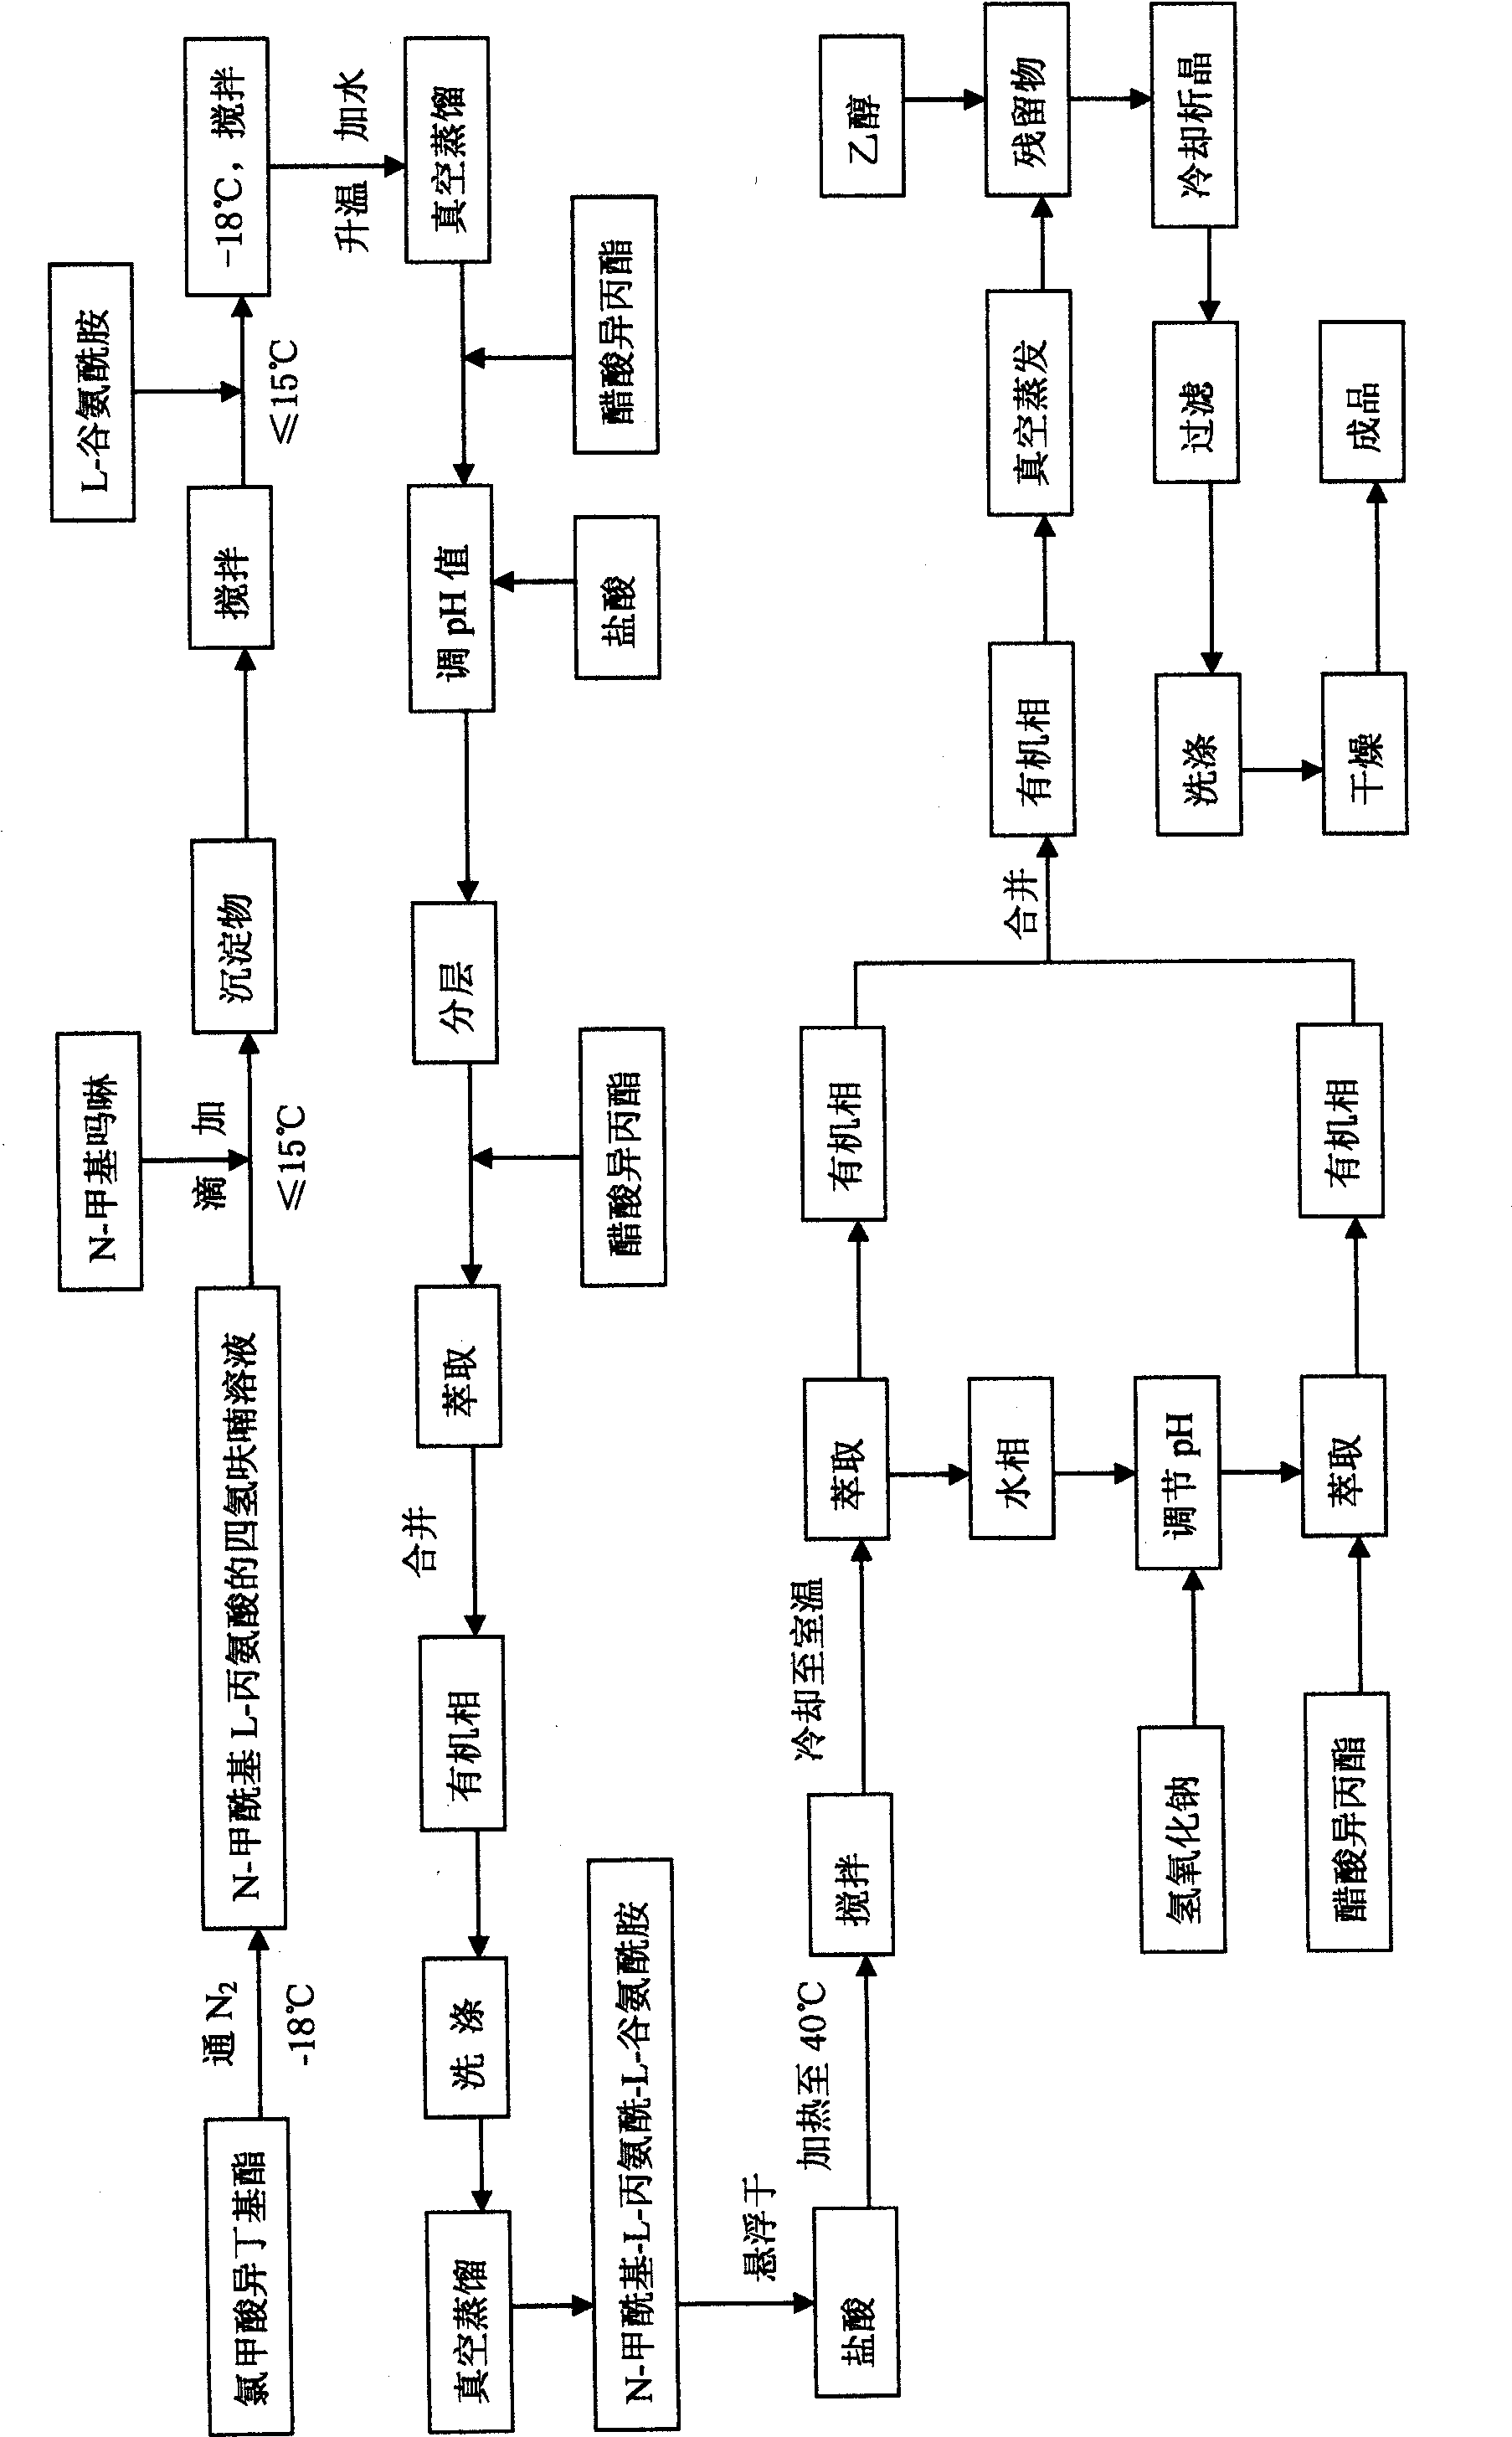 L-alanyl-L-glutamine compound and synthetic method thereof